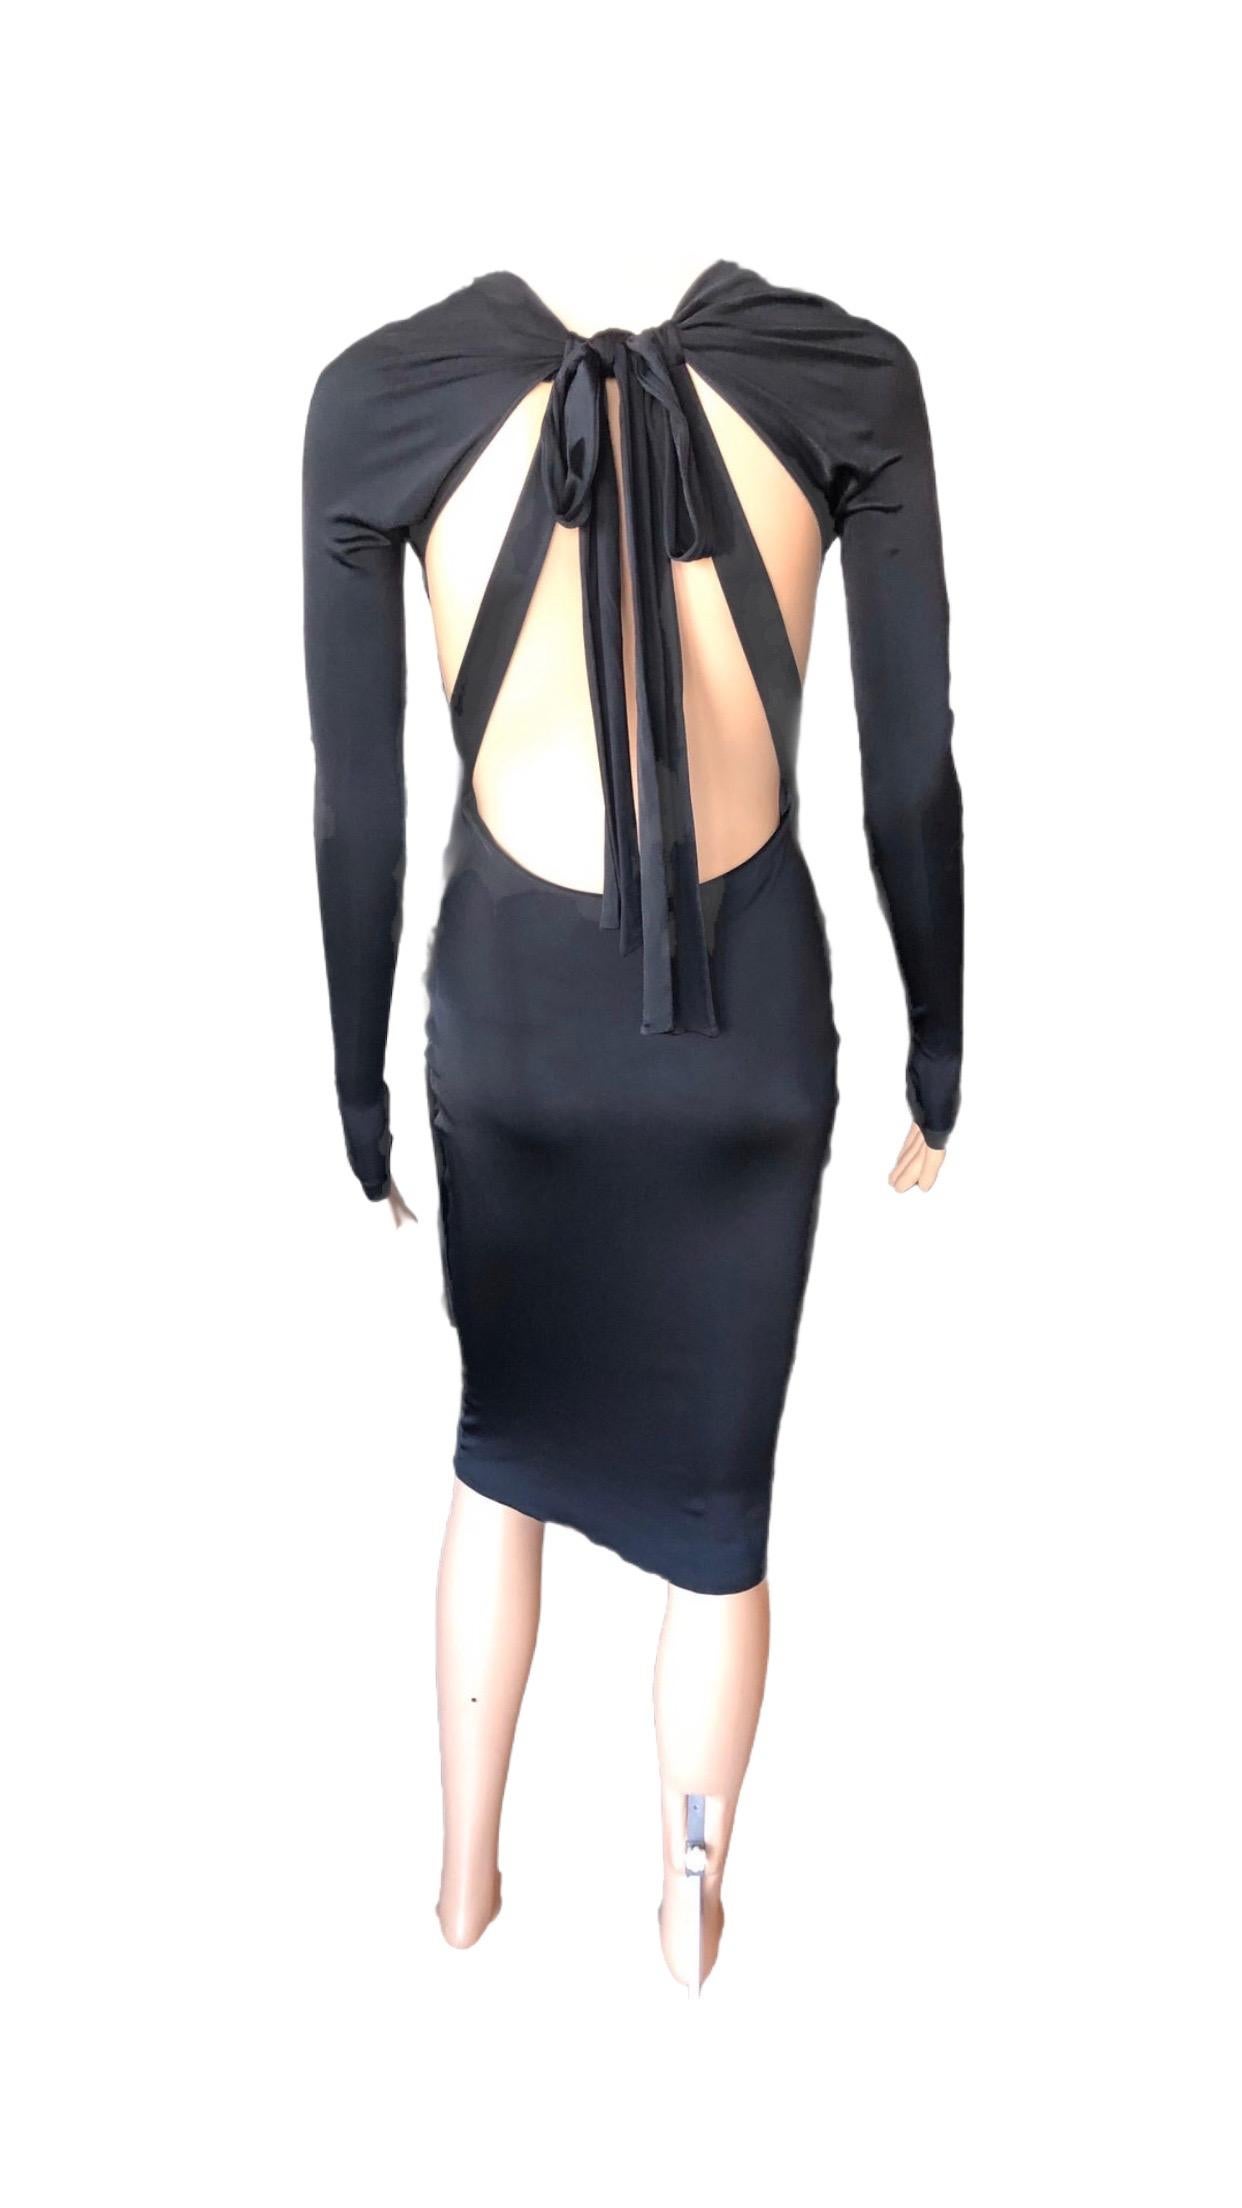 Gucci S/S 2005 Tom Ford Plunging Cutout Backless Bodycon Black Dress For Sale 5